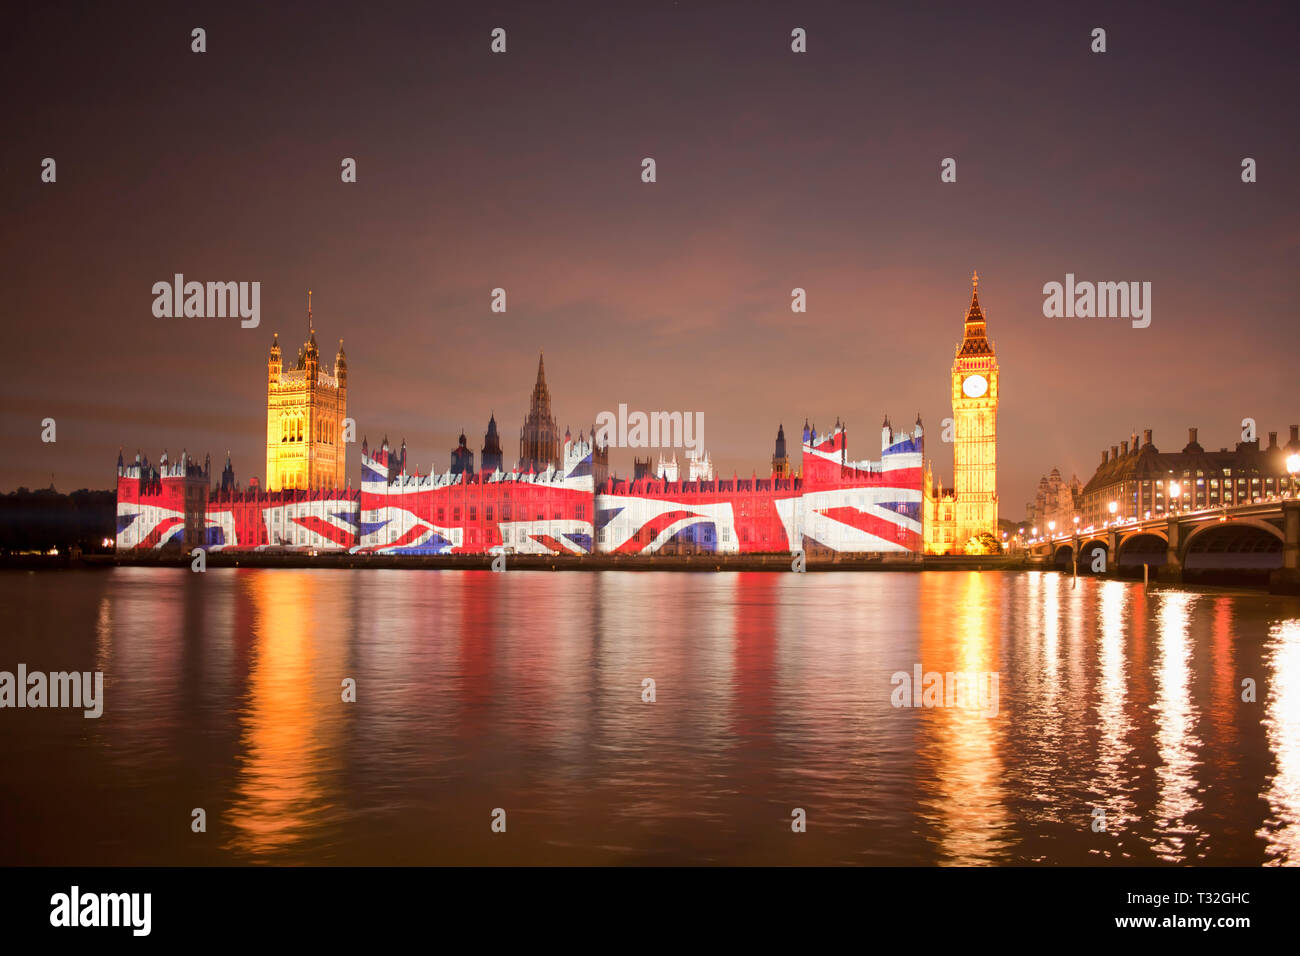 Union Jack Flag projected onto the Houses of Parliament at dusk london england Stock Photo